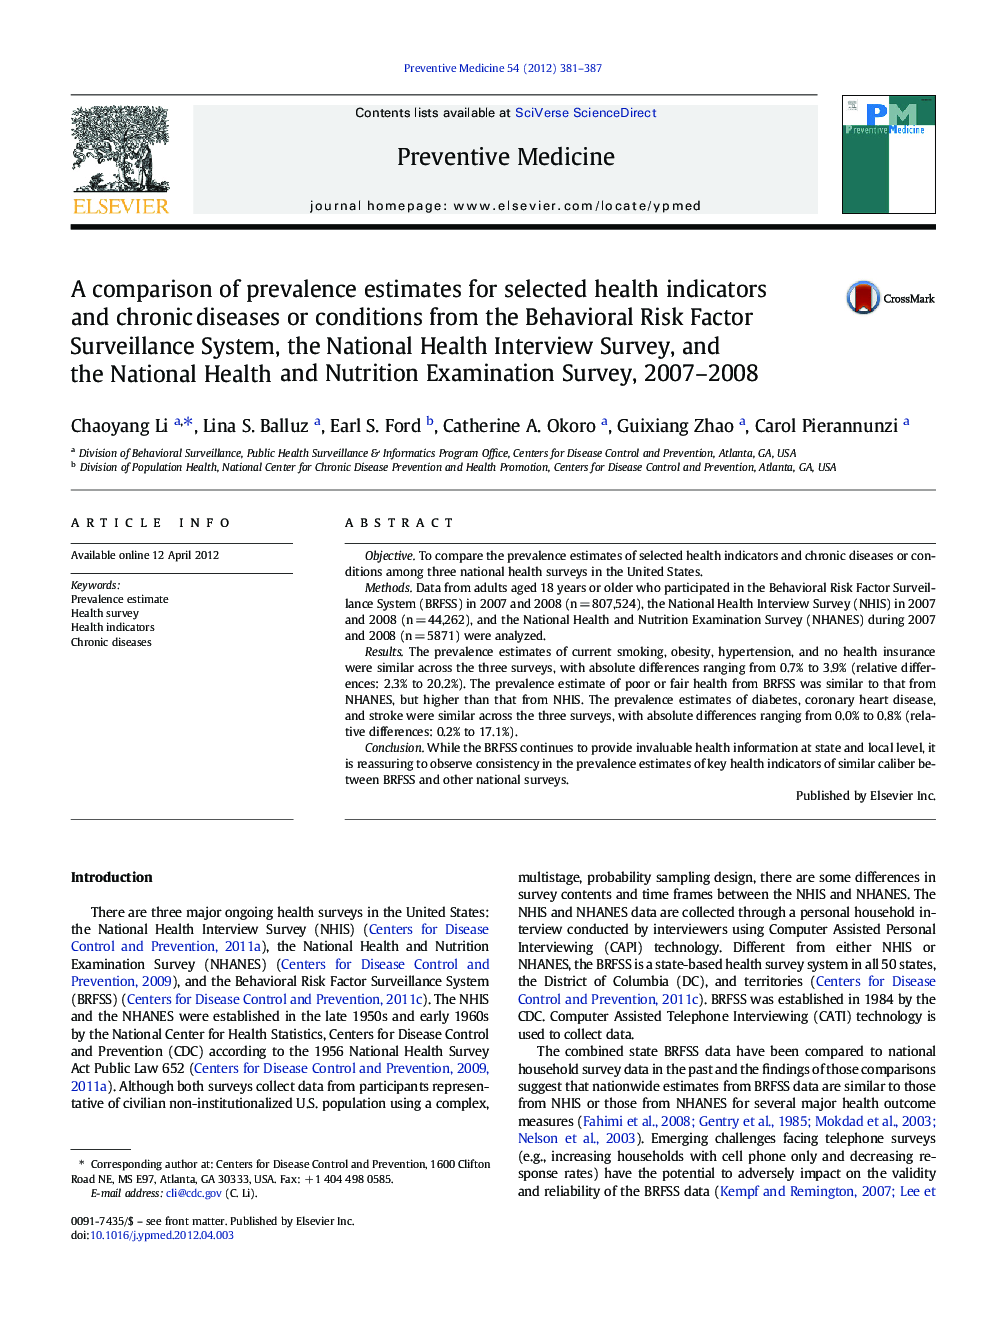 A comparison of prevalence estimates for selected health indicators and chronic diseases or conditions from the Behavioral Risk Factor Surveillance System, the National Health Interview Survey, and the National Health and Nutrition Examination Survey, 200